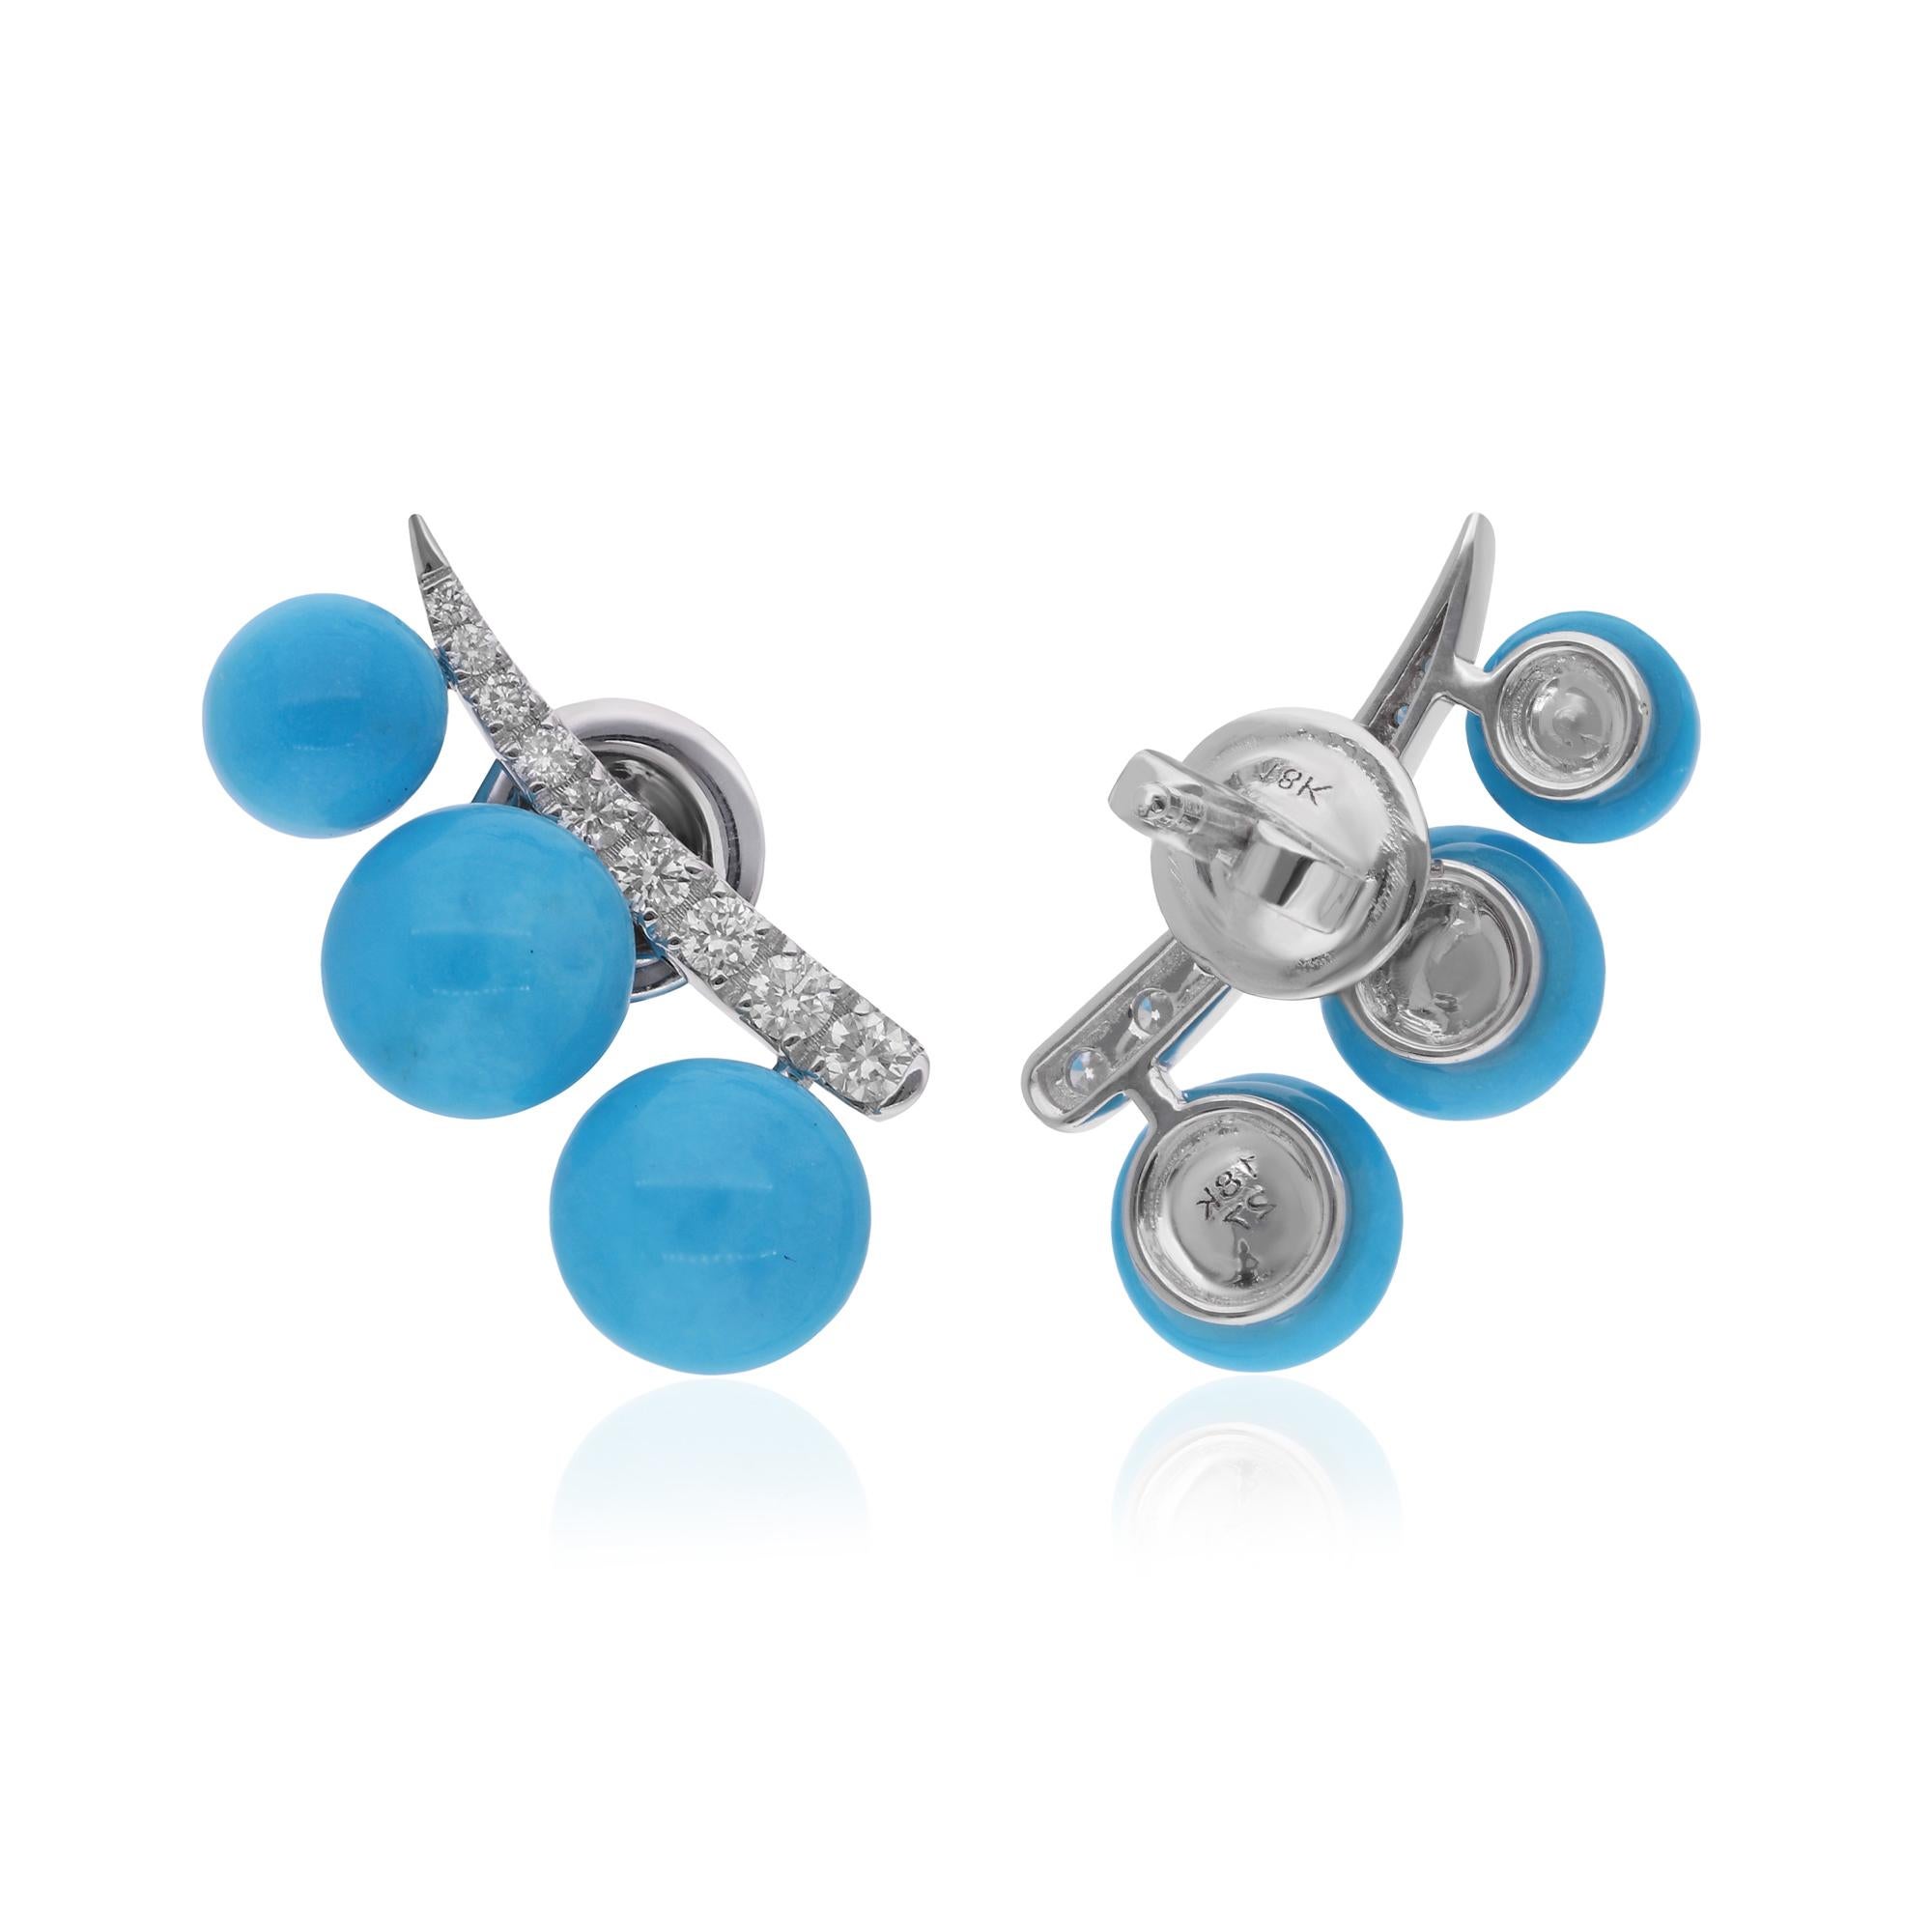 Surrounding the turquoise gemstones are shimmering diamonds, meticulously set in elegant 18 karat white gold settings. These diamonds, chosen for their exceptional brilliance and clarity, add a touch of celestial radiance to the earrings, enhancing